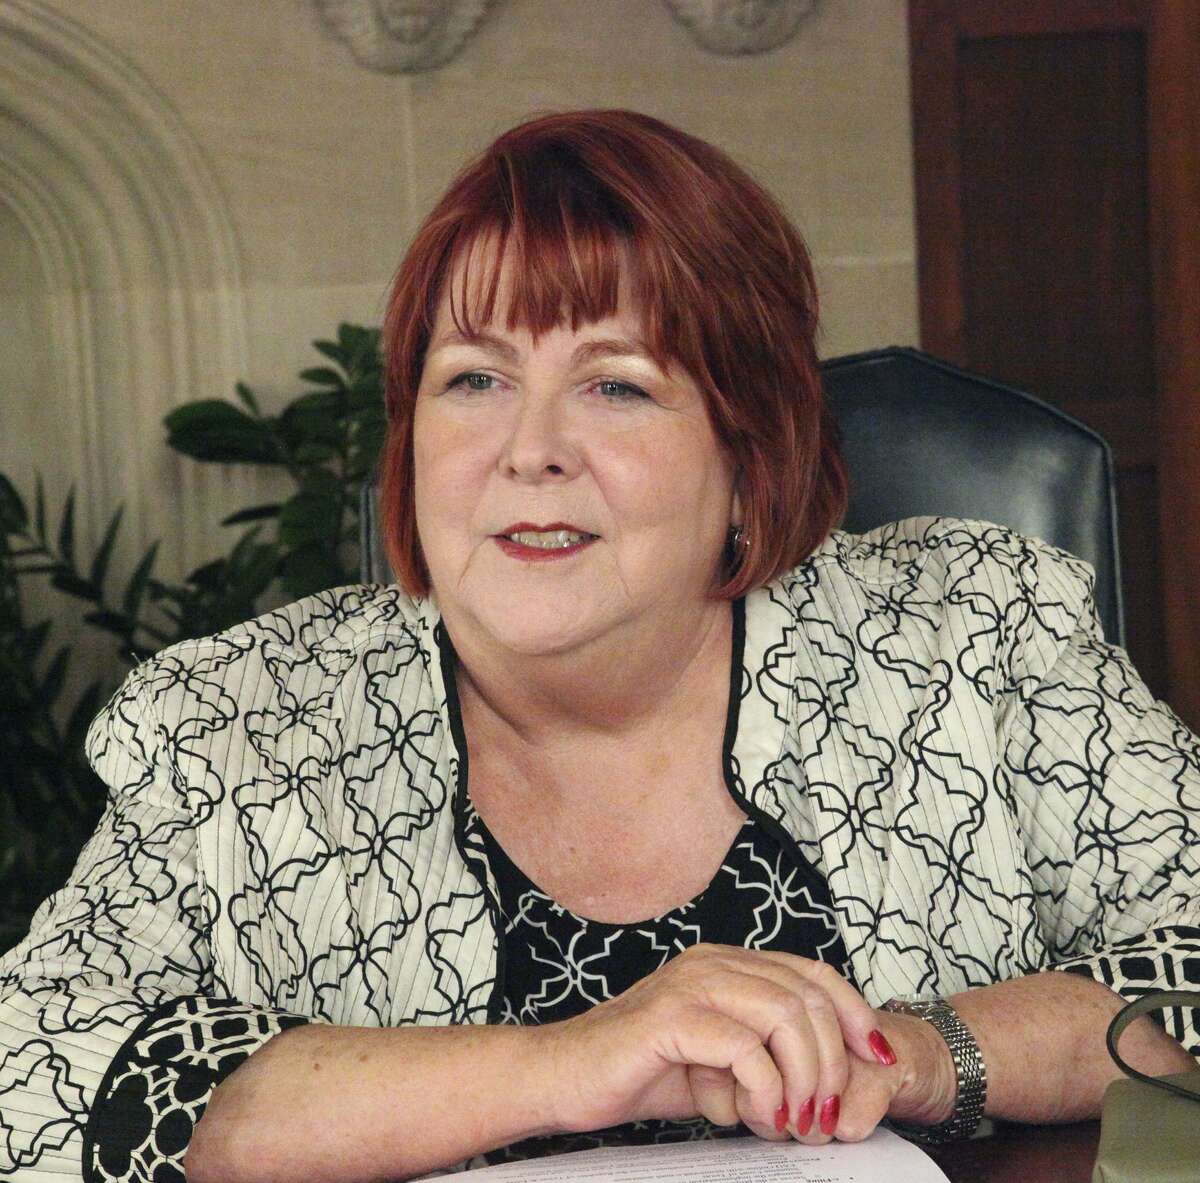 District Clerk candidate Donna Kay McKinney was defeated in her re-election bid on Tuesday, as was County Clerk Gerry Rickhoff. The public would be best served by a smooth transitions to their successors.